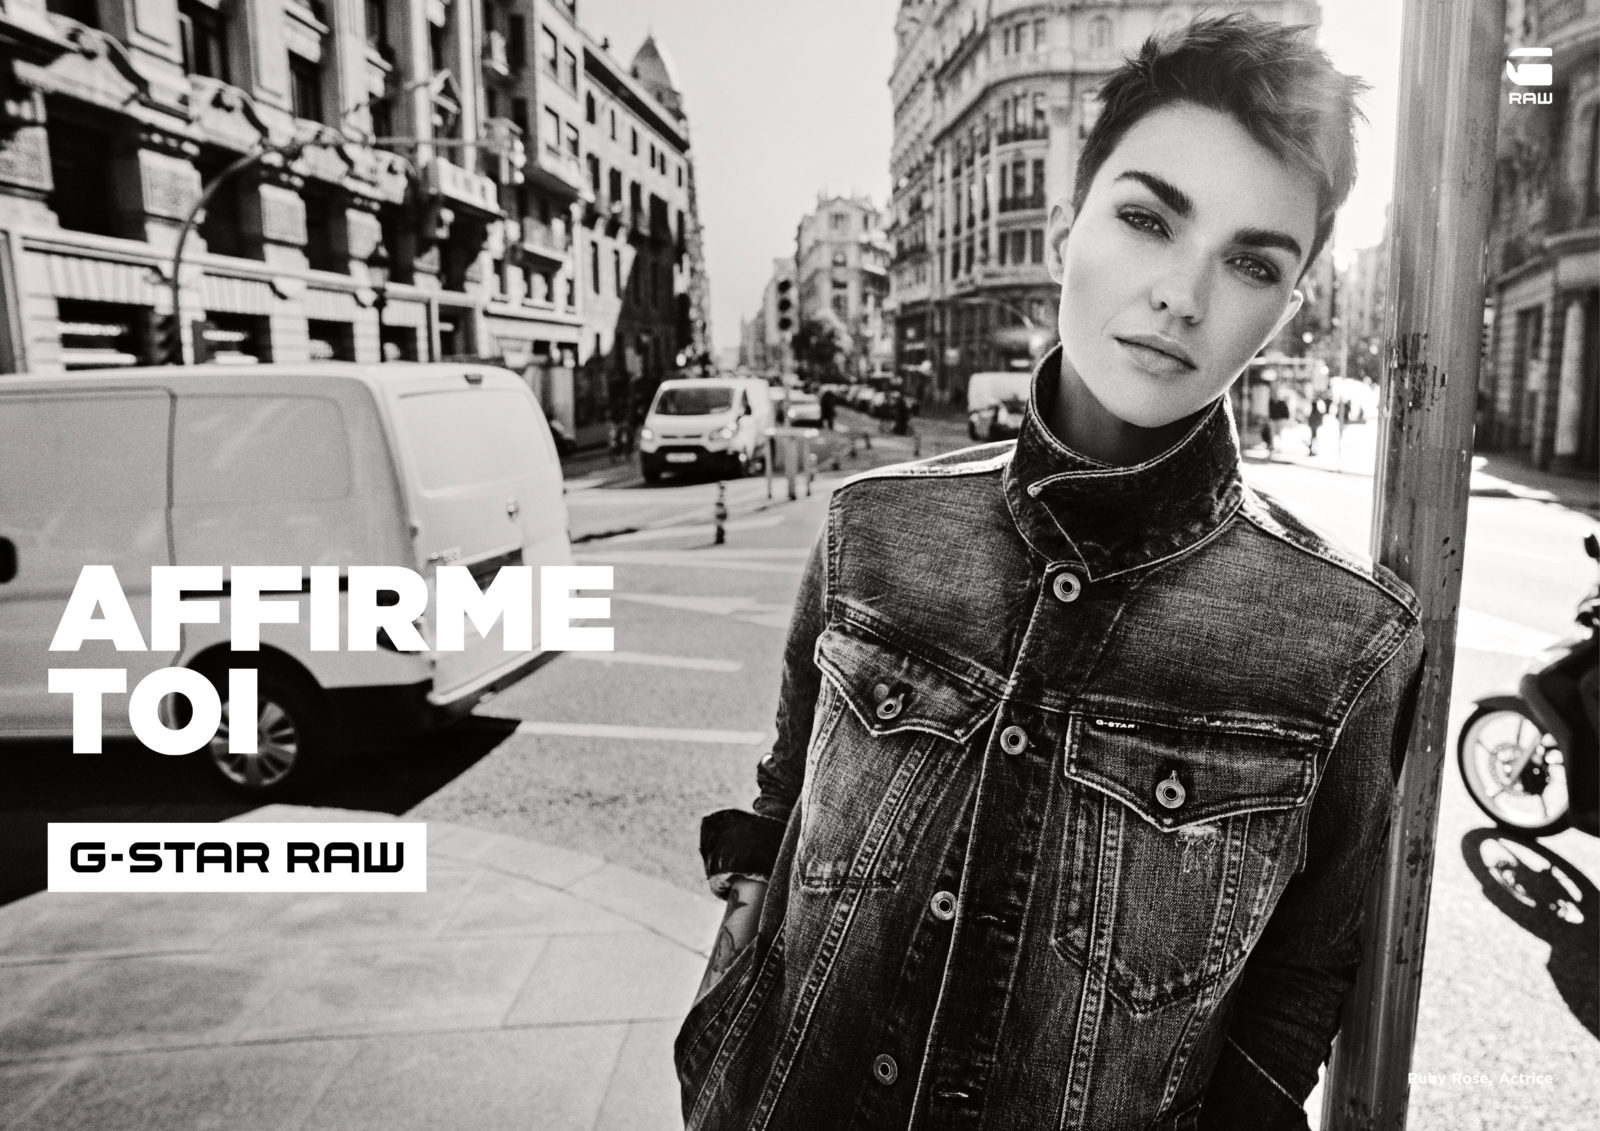 G-STAR RAW TEAMS UP WITH RUBY ROSE ON 